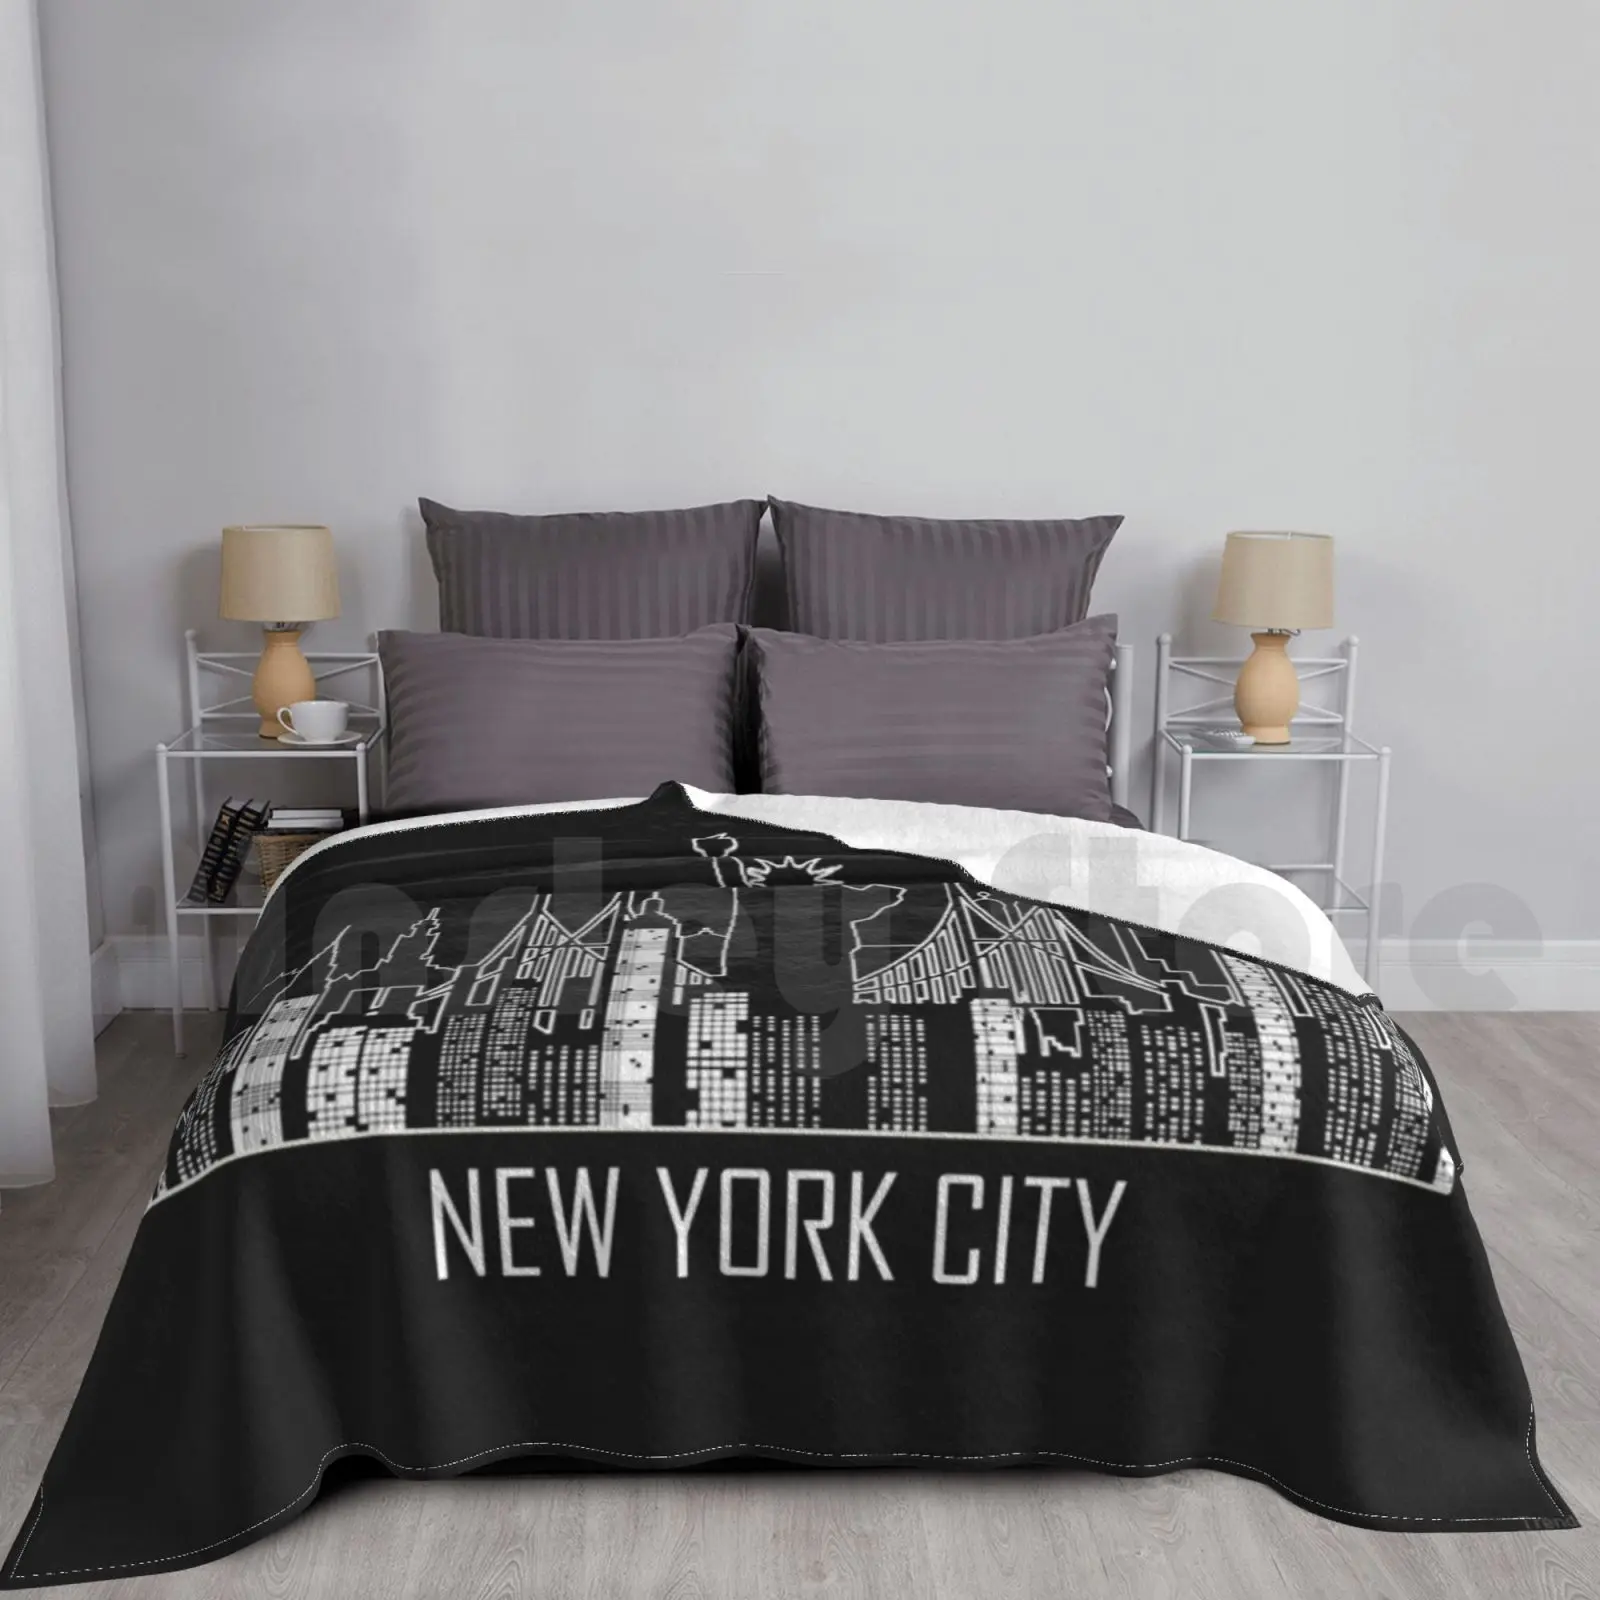 

New York City Skyline Silhouette With Statue Of Liberty Usa United States Of America Blanket For Sofa Bed Travel